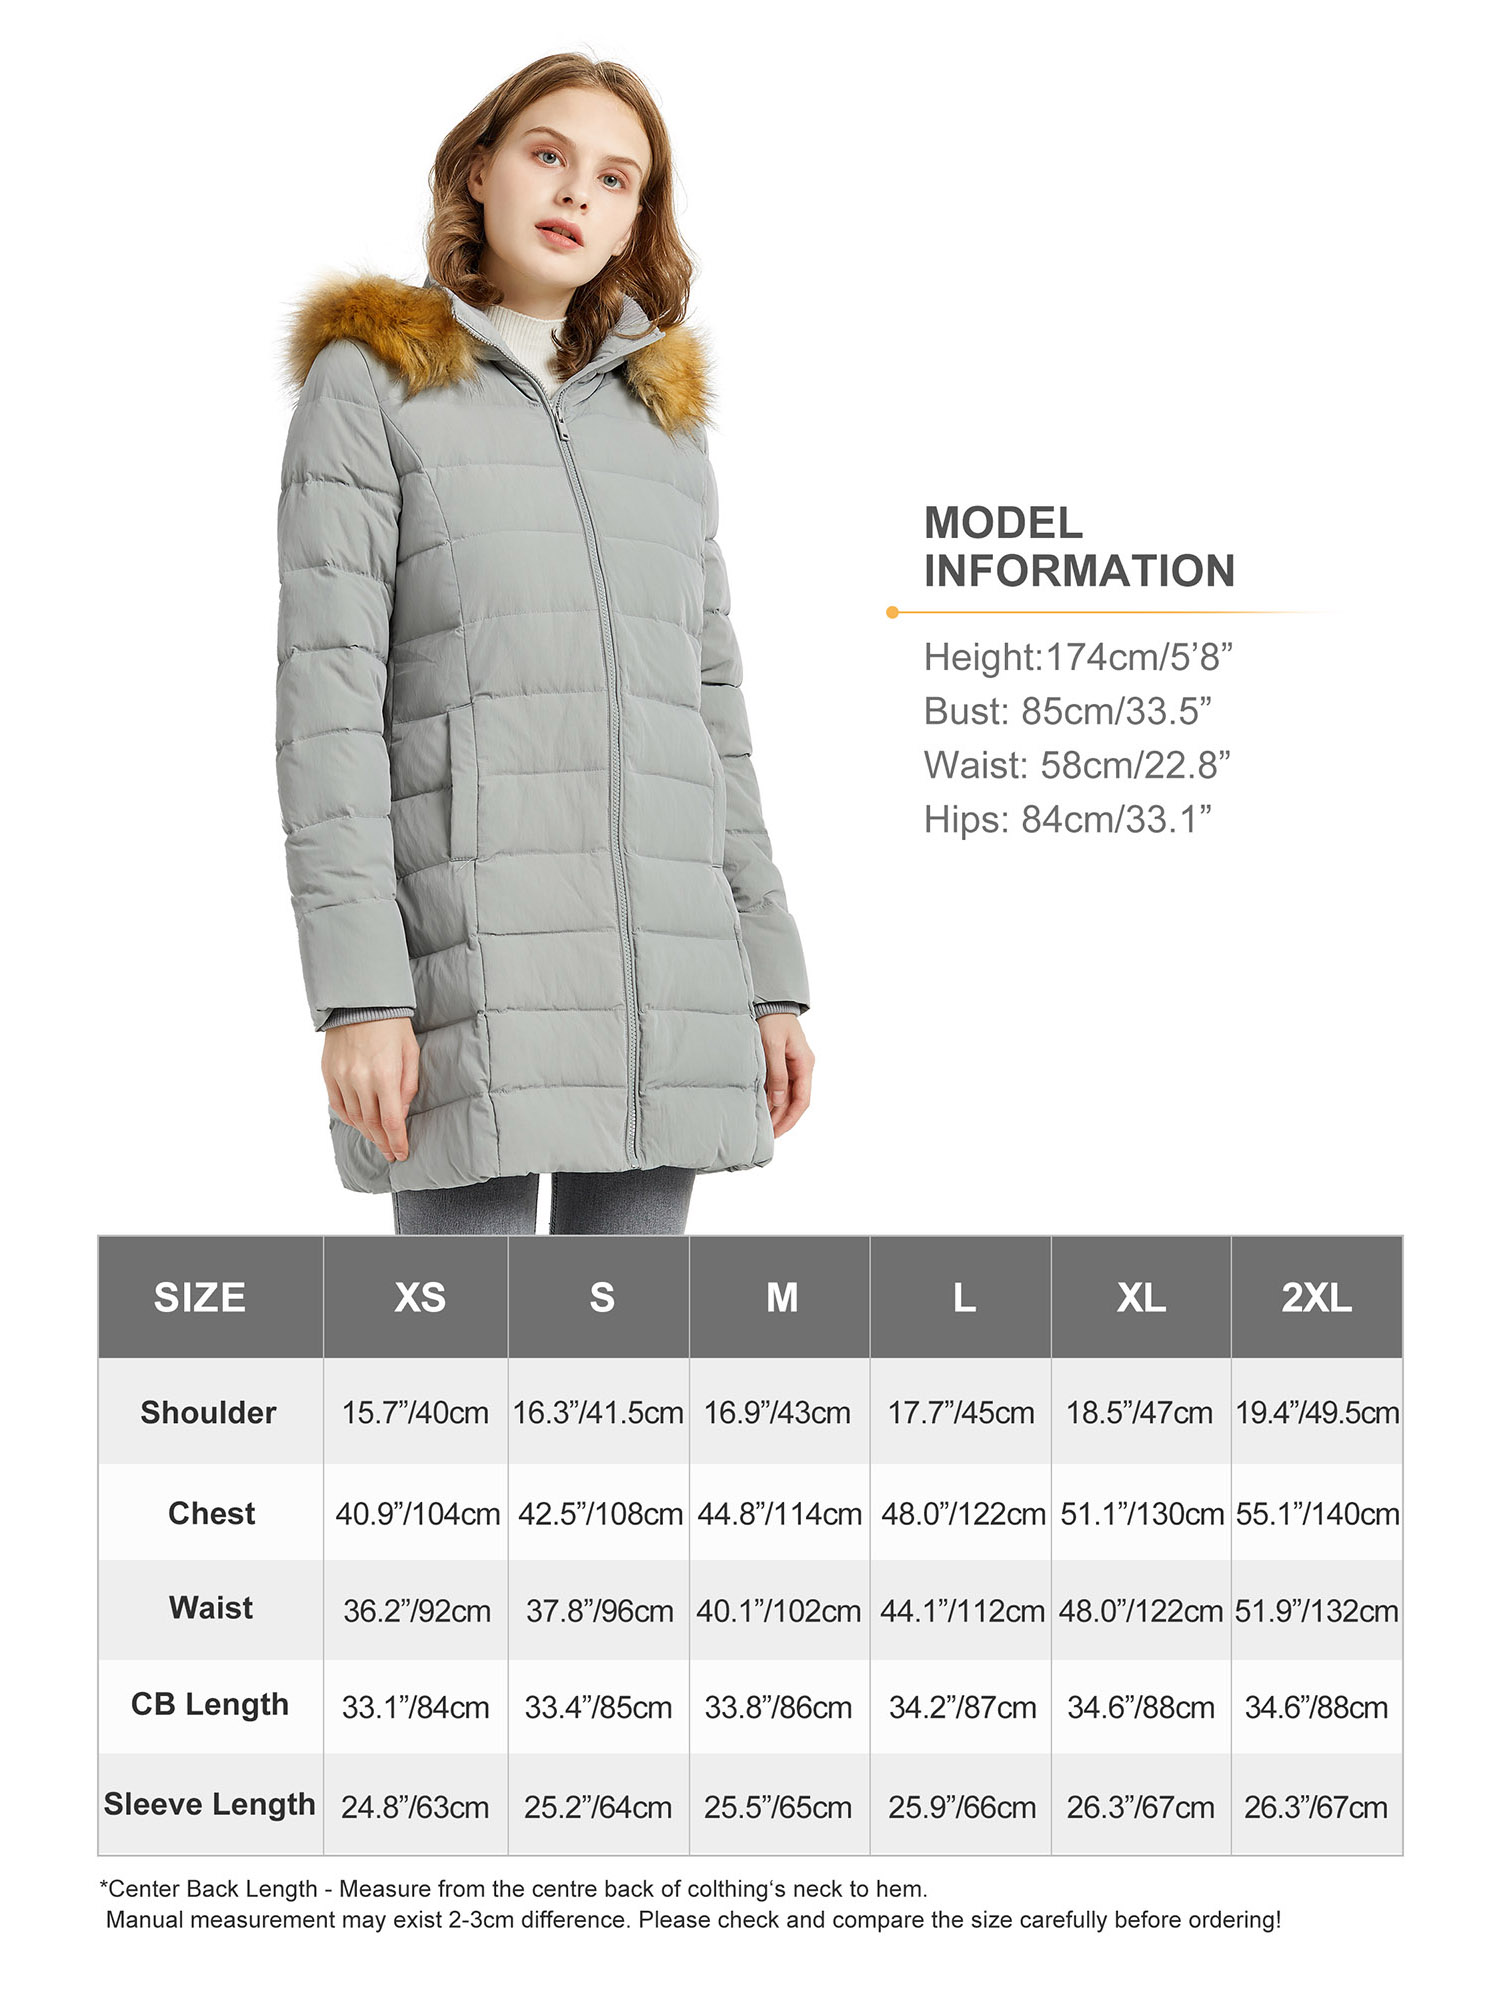 Orolay Women's Lightweight Quilted Down Jackets Water Resistant Slim Winter Coat Grey L - image 5 of 5